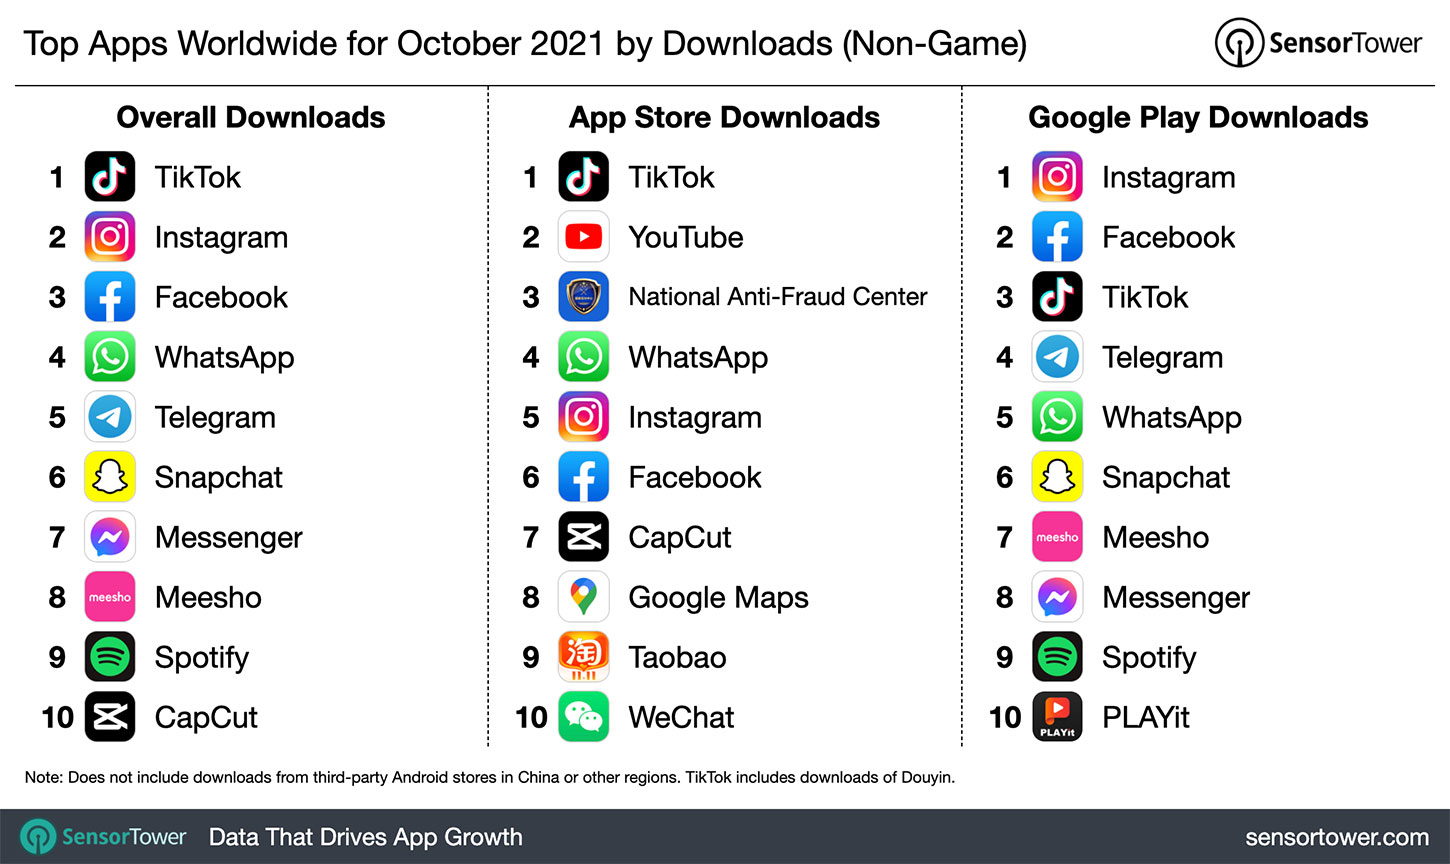 Top Apps Worldwide for October 2021 by Downloads